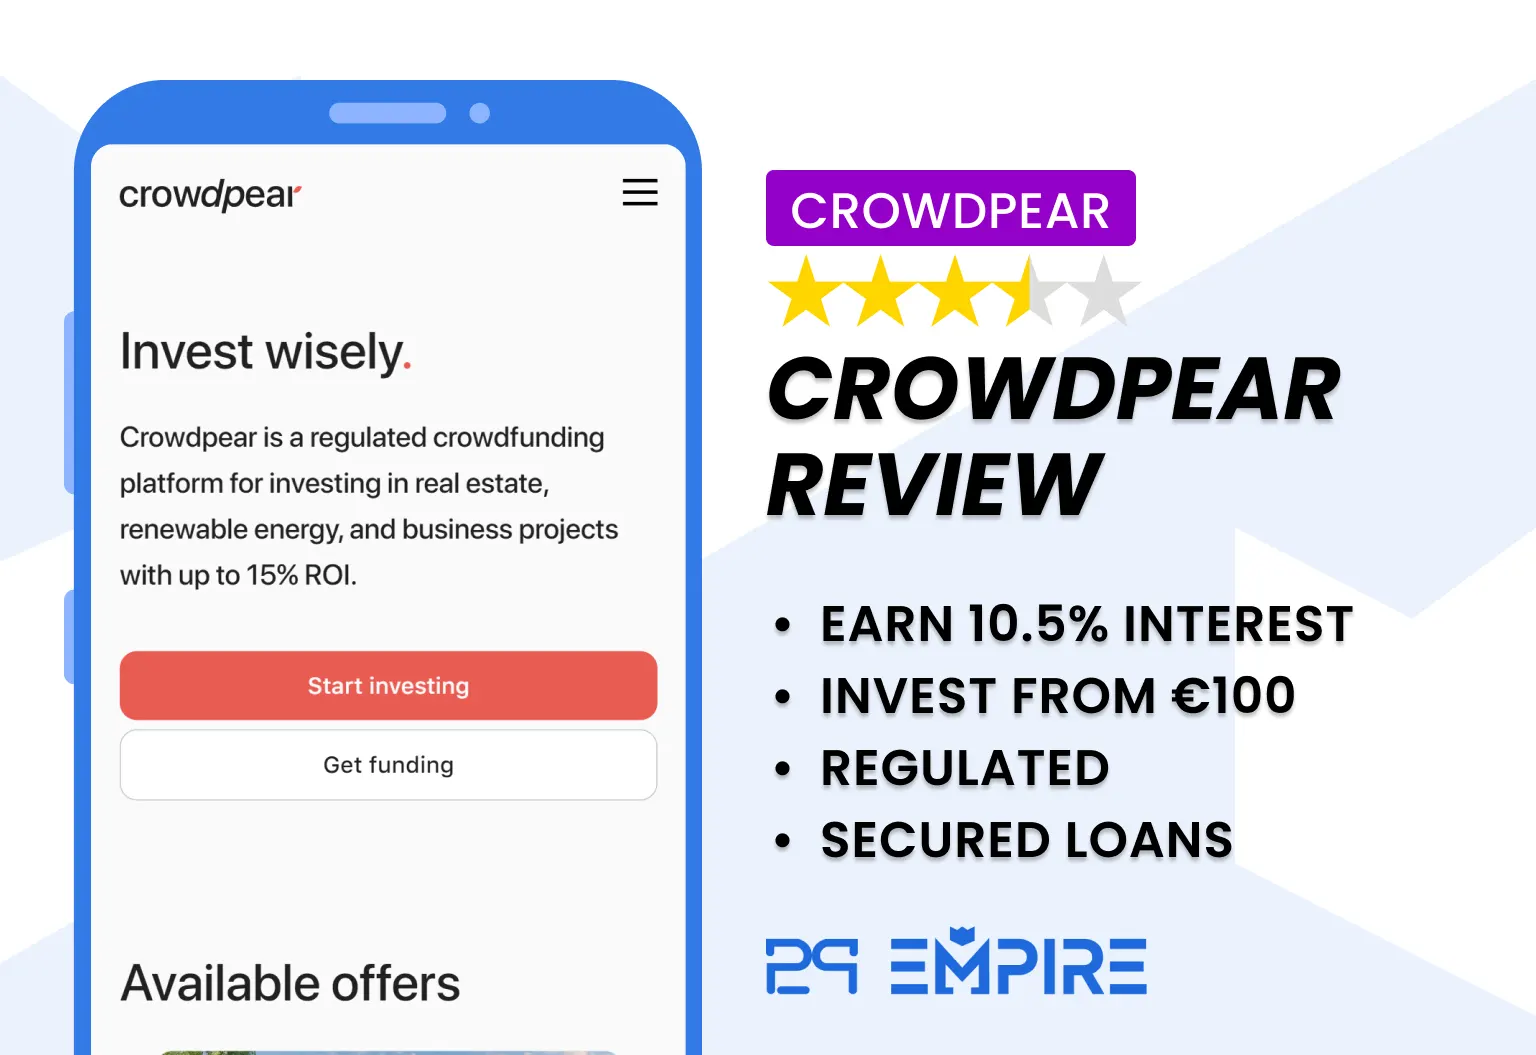 crowdpear review